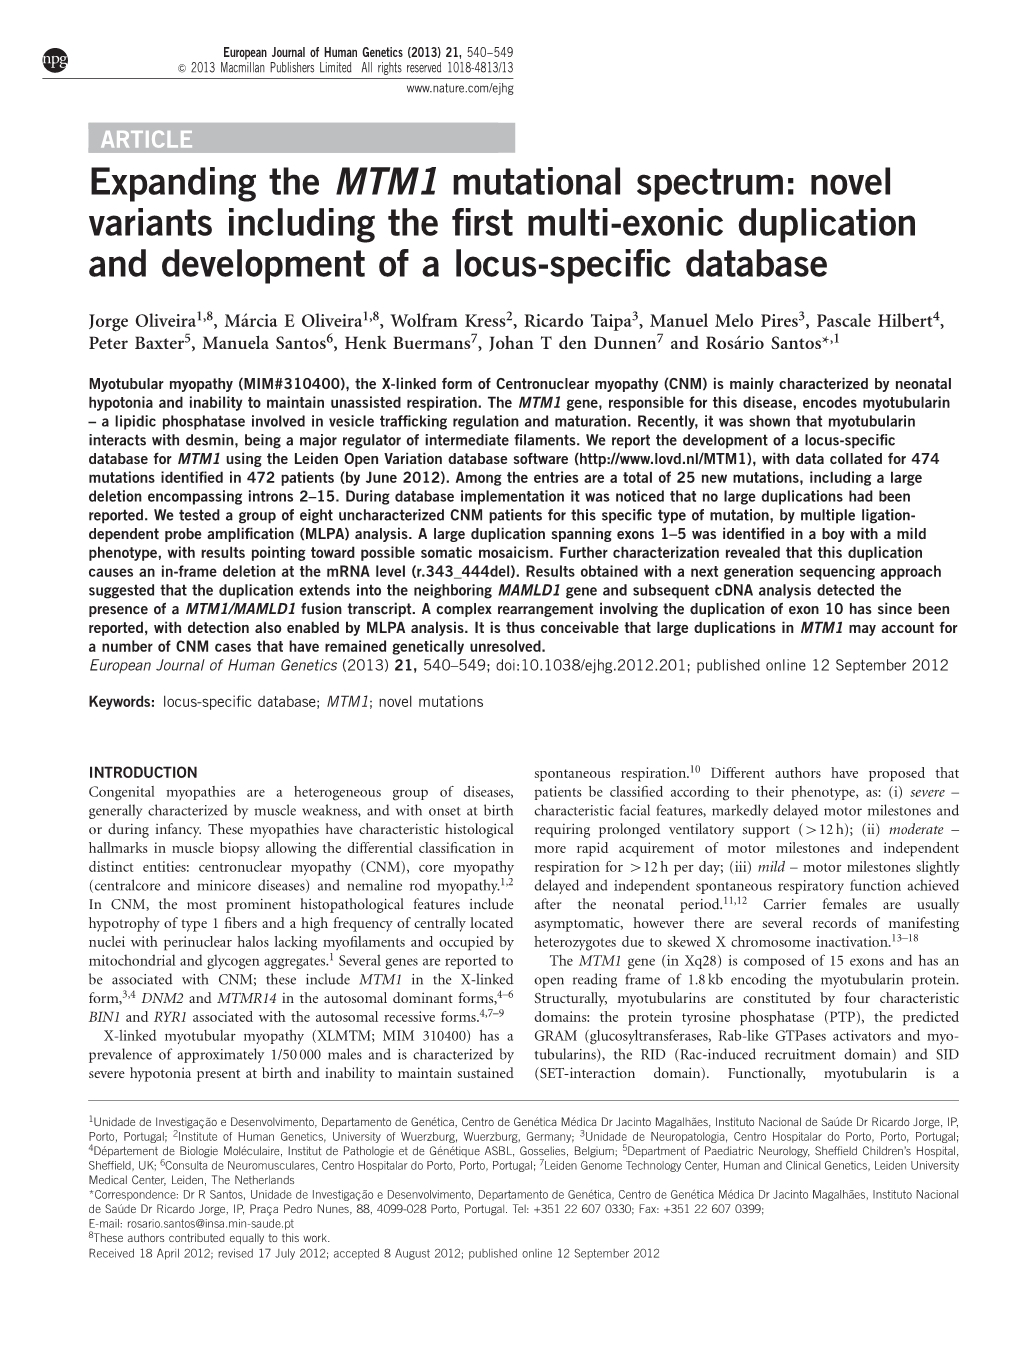 Expanding the MTM1 Mutational Spectrum: Novel Variants Including the ﬁrst Multi-Exonic Duplication and Development of a Locus-Speciﬁc Database